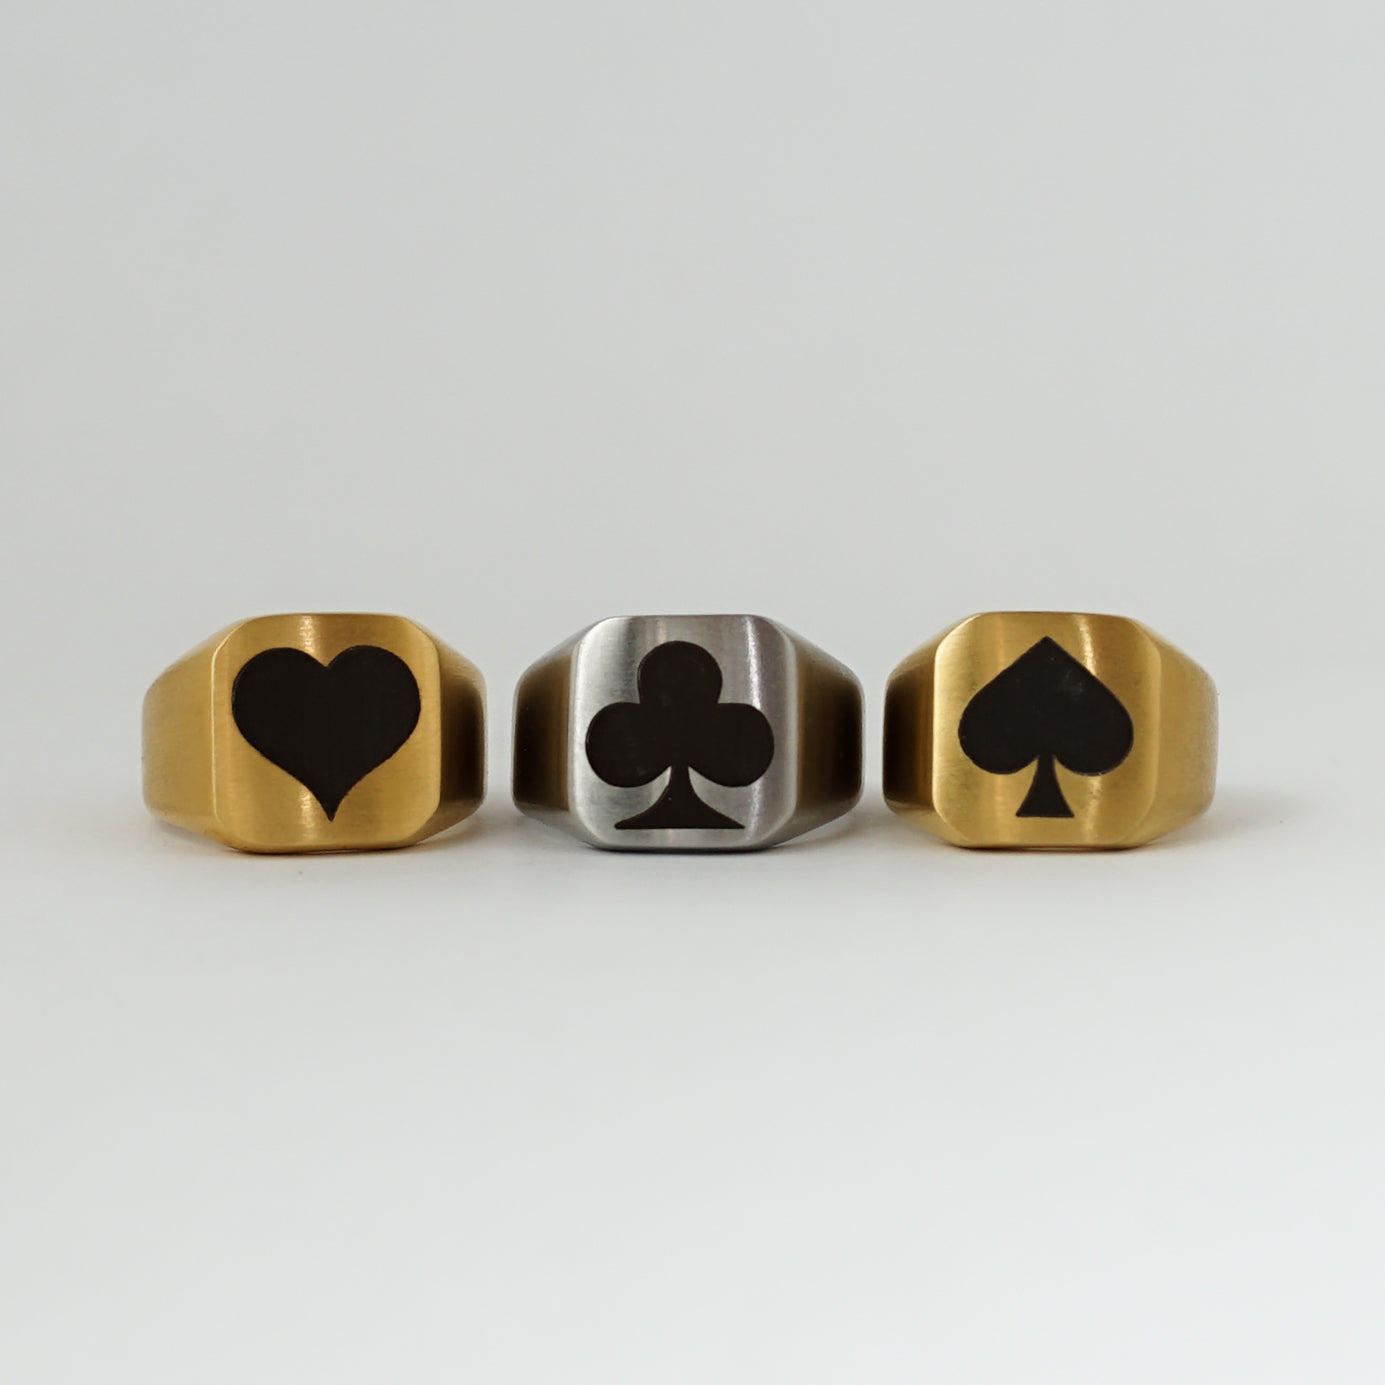 Clubs symbol play card ring